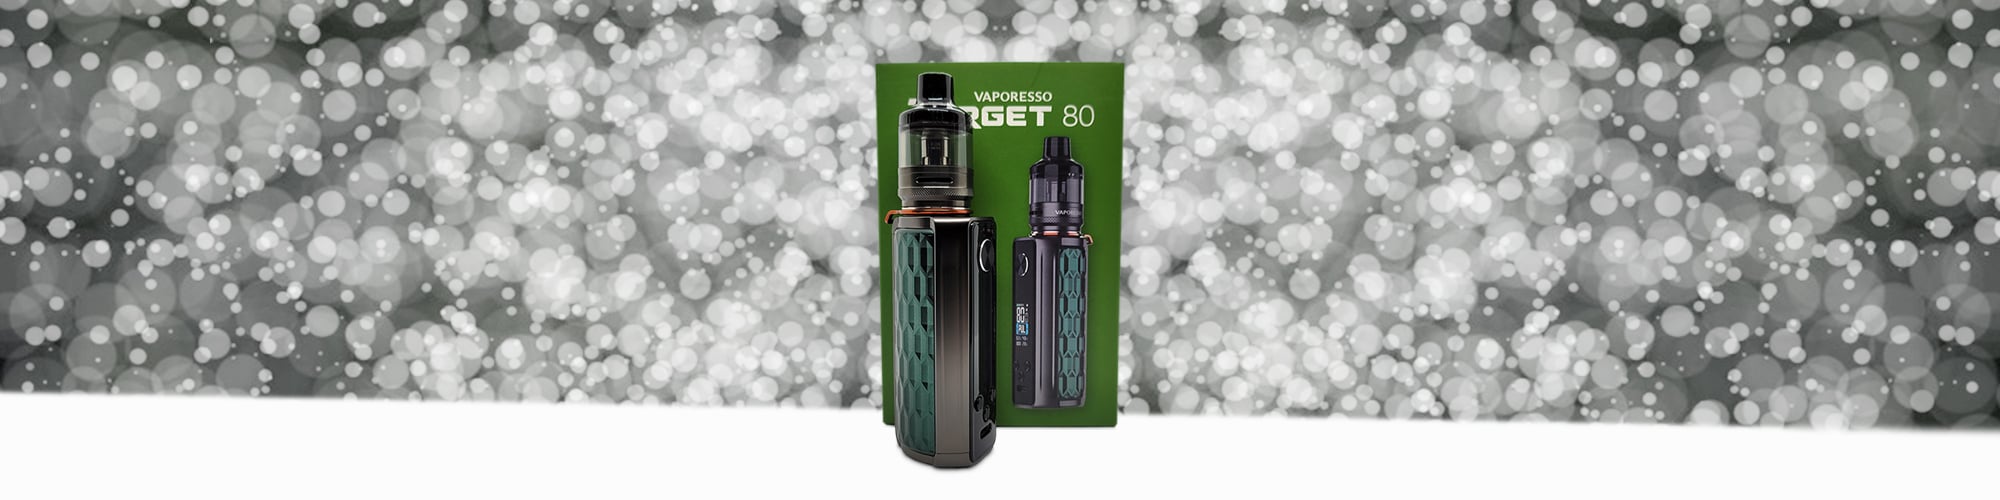 Vaporesso Target 80 Review Main Banner